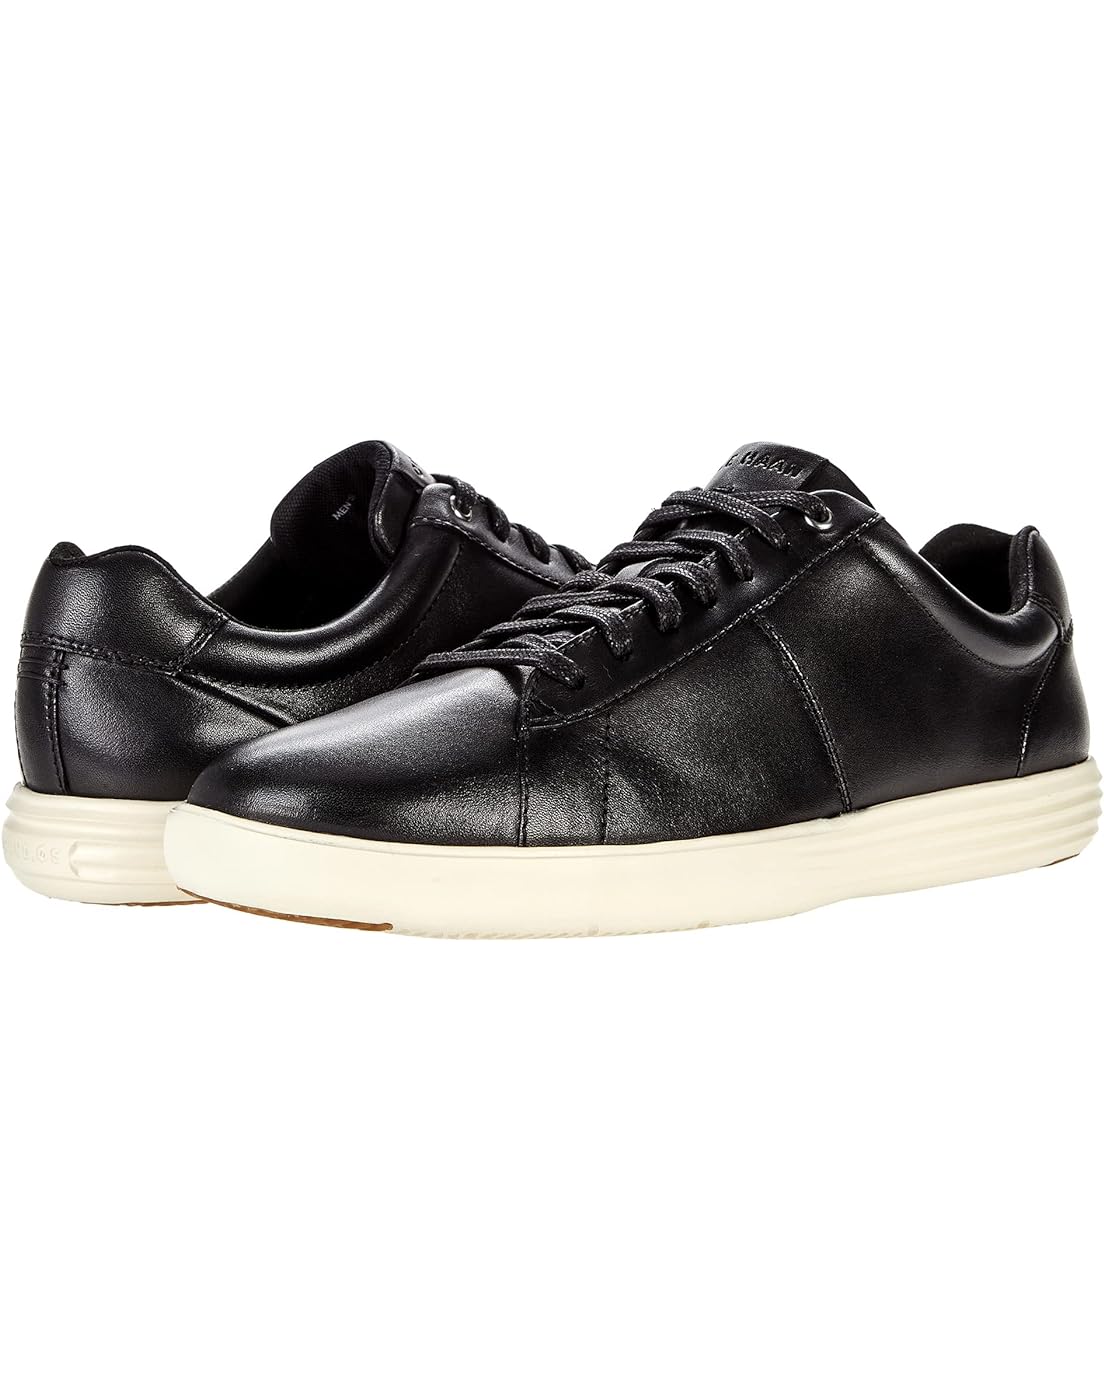 Cole Haan Reagan Lace-Up Sneaker